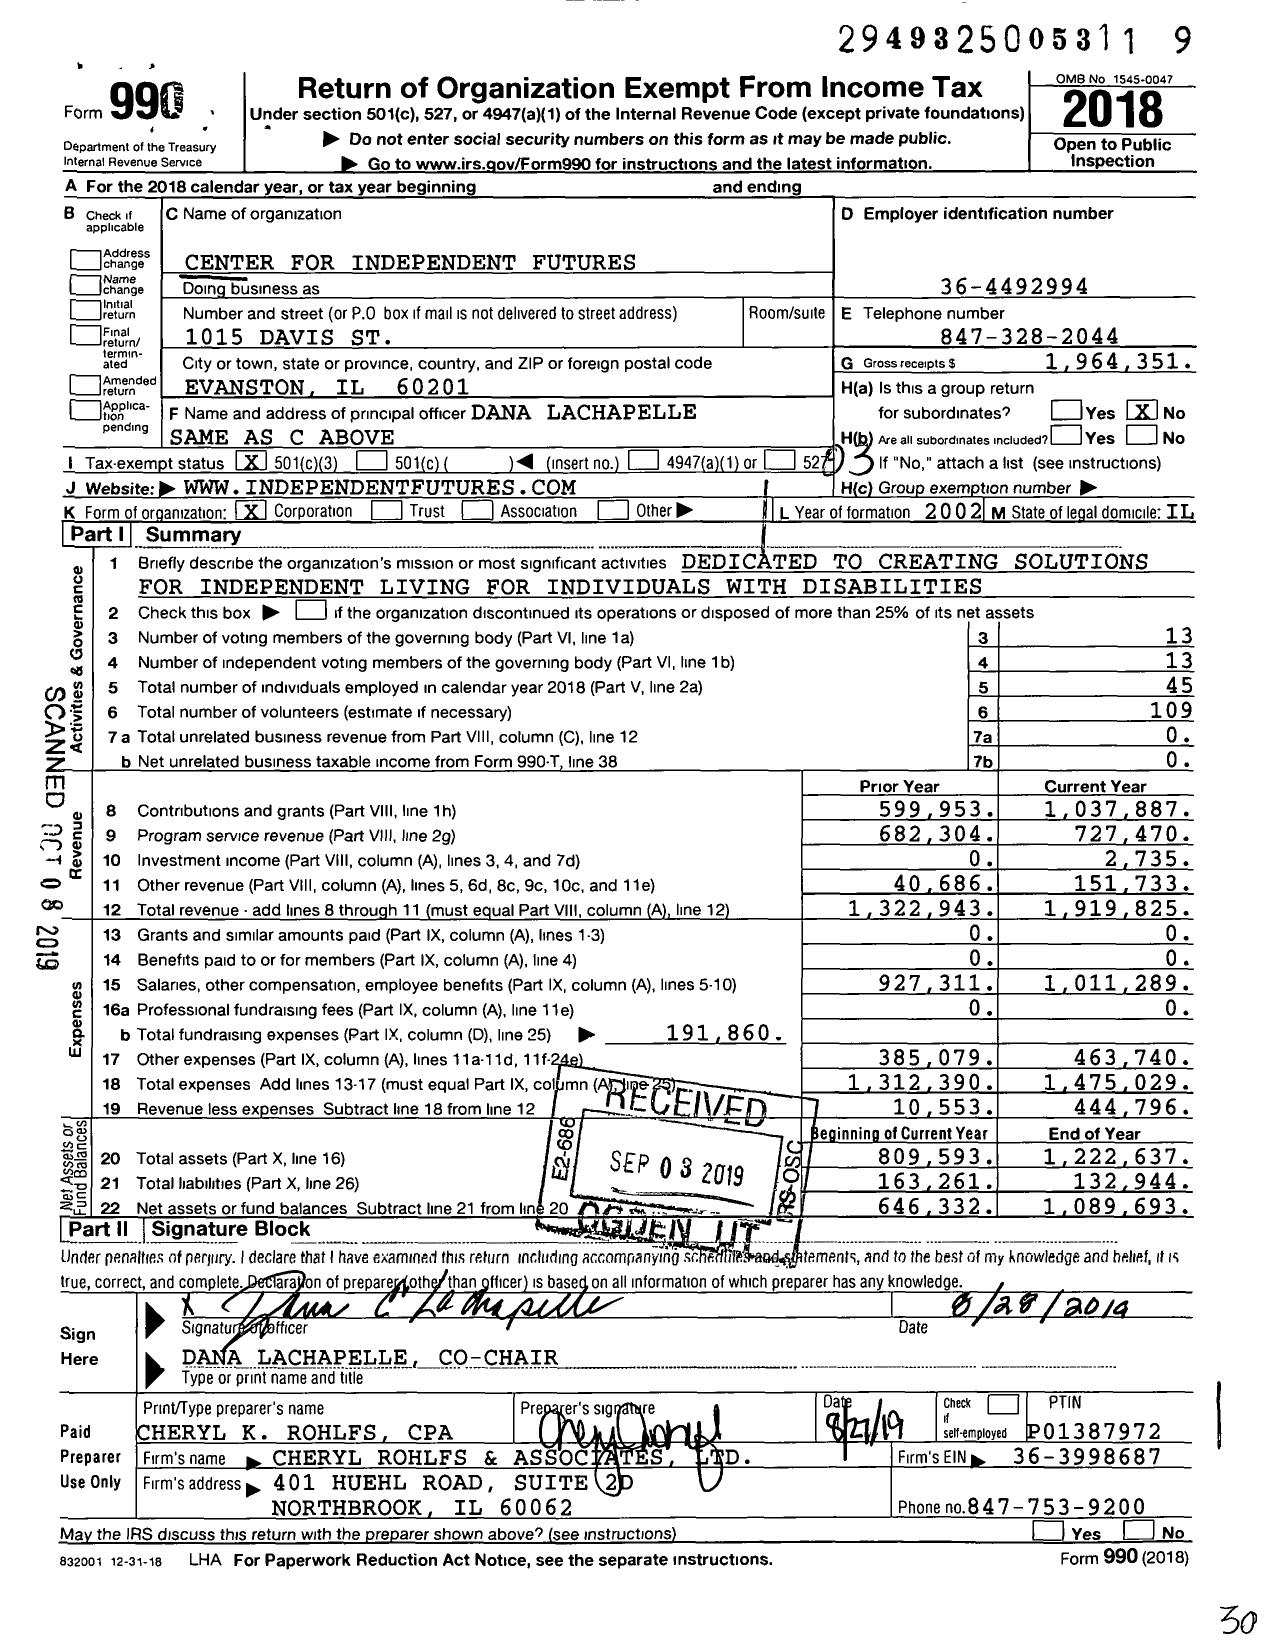 Image of first page of 2018 Form 990 for Center for Independent Futures (CIF)